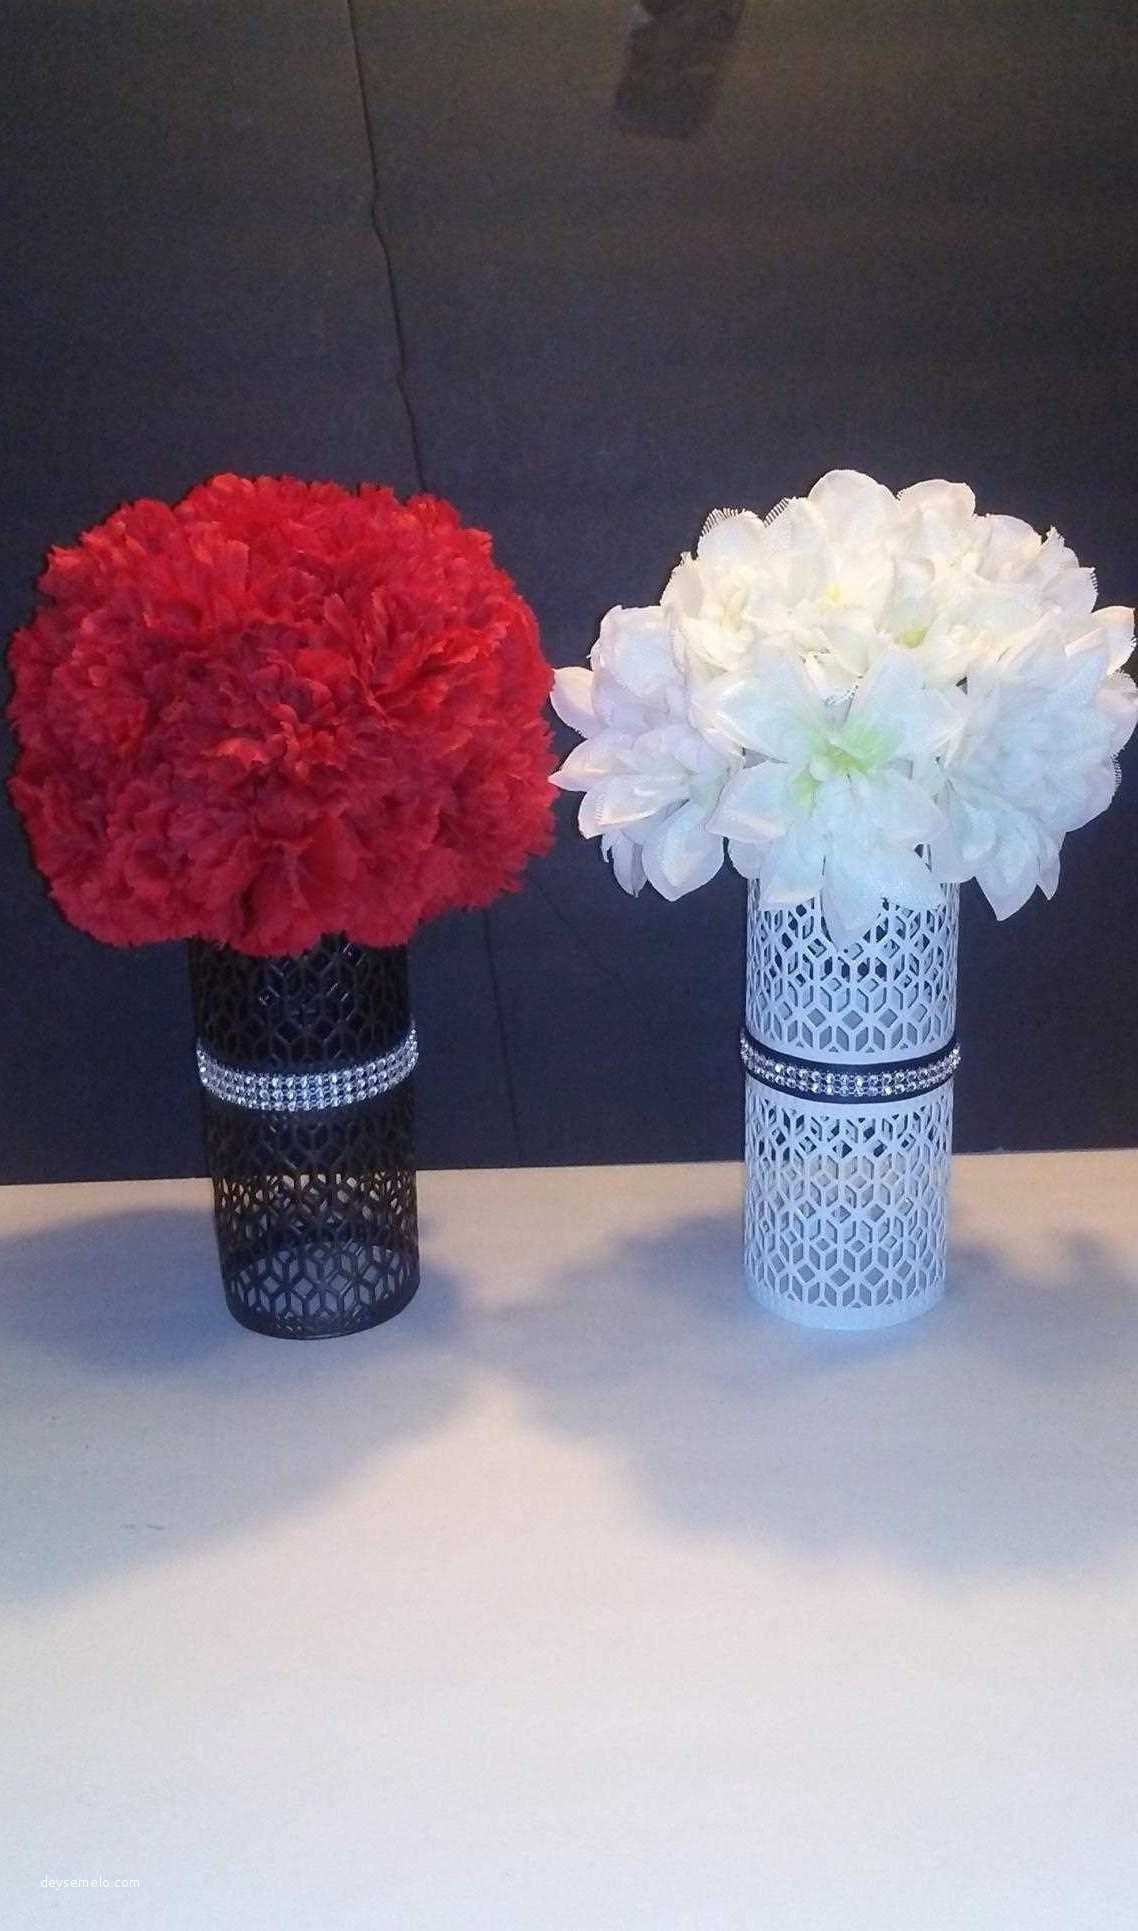 15 Wonderful Polka Dot Vase 2024 free download polka dot vase of amazing garland decorating ideas with how to make an easy diy in romantic garland decorating ideas from dollar tree wedding decorations awesome h vases dollar vase i 0d